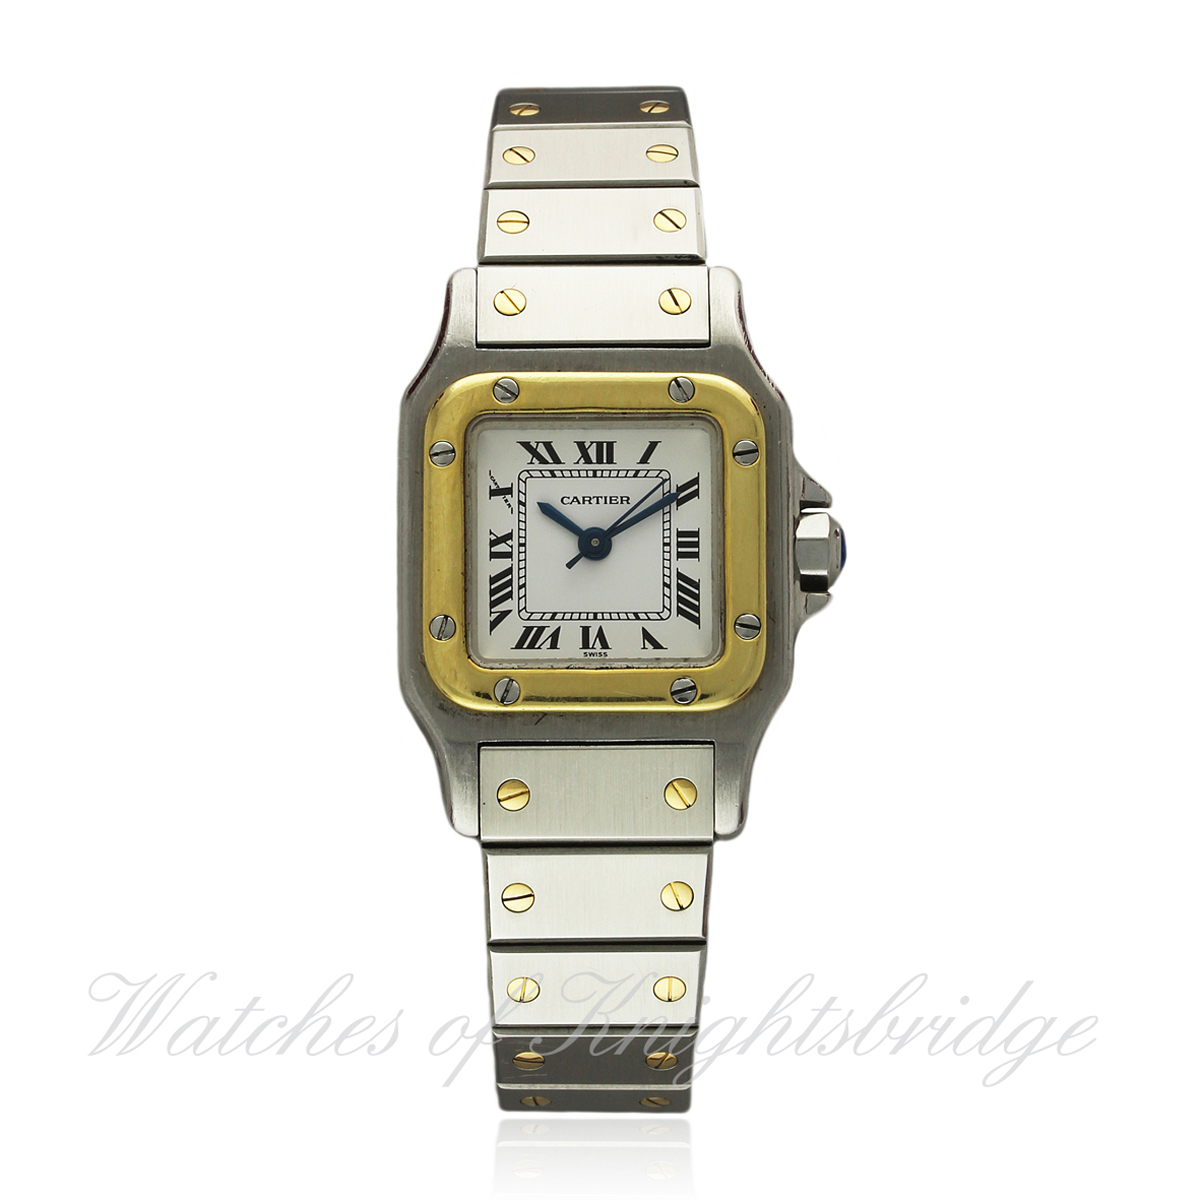 A LADIES STEEL & GOLD CARTIER SANTOS AUTOMATIC BRACELET WATCH CIRCA 1990s D: White dial with applied